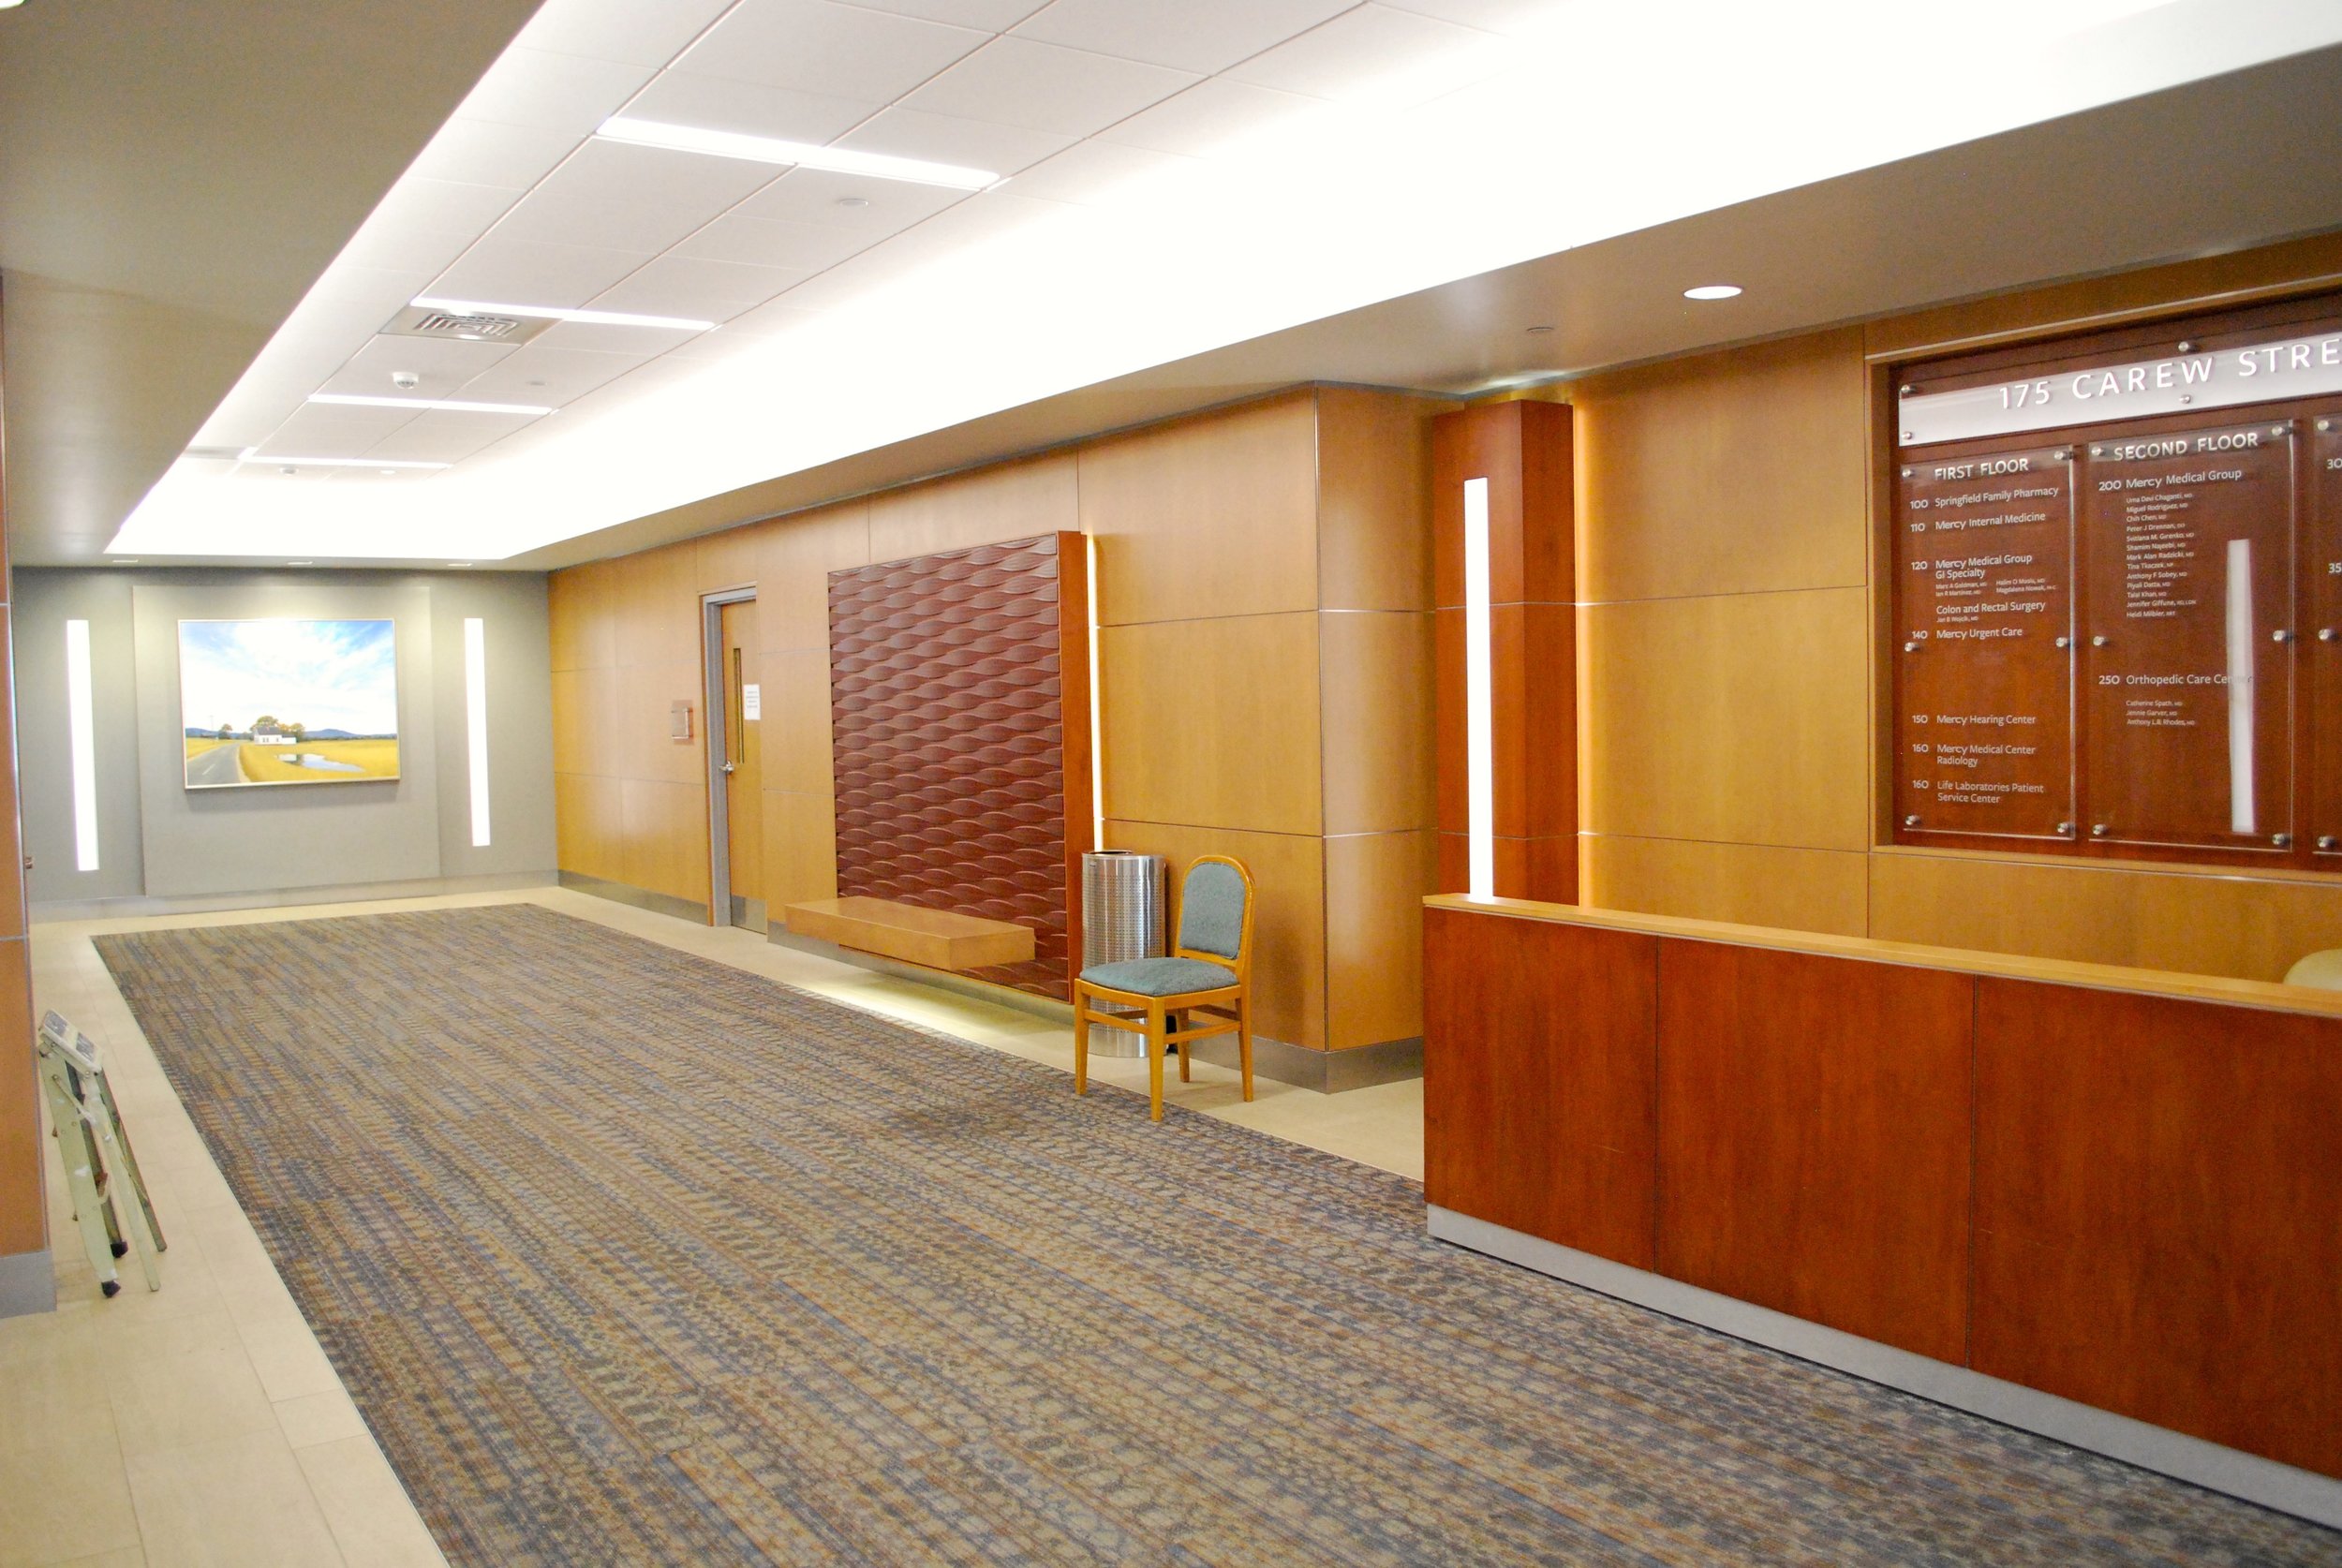 commercial real estate development investment MA CT cerw st lobby .jpg